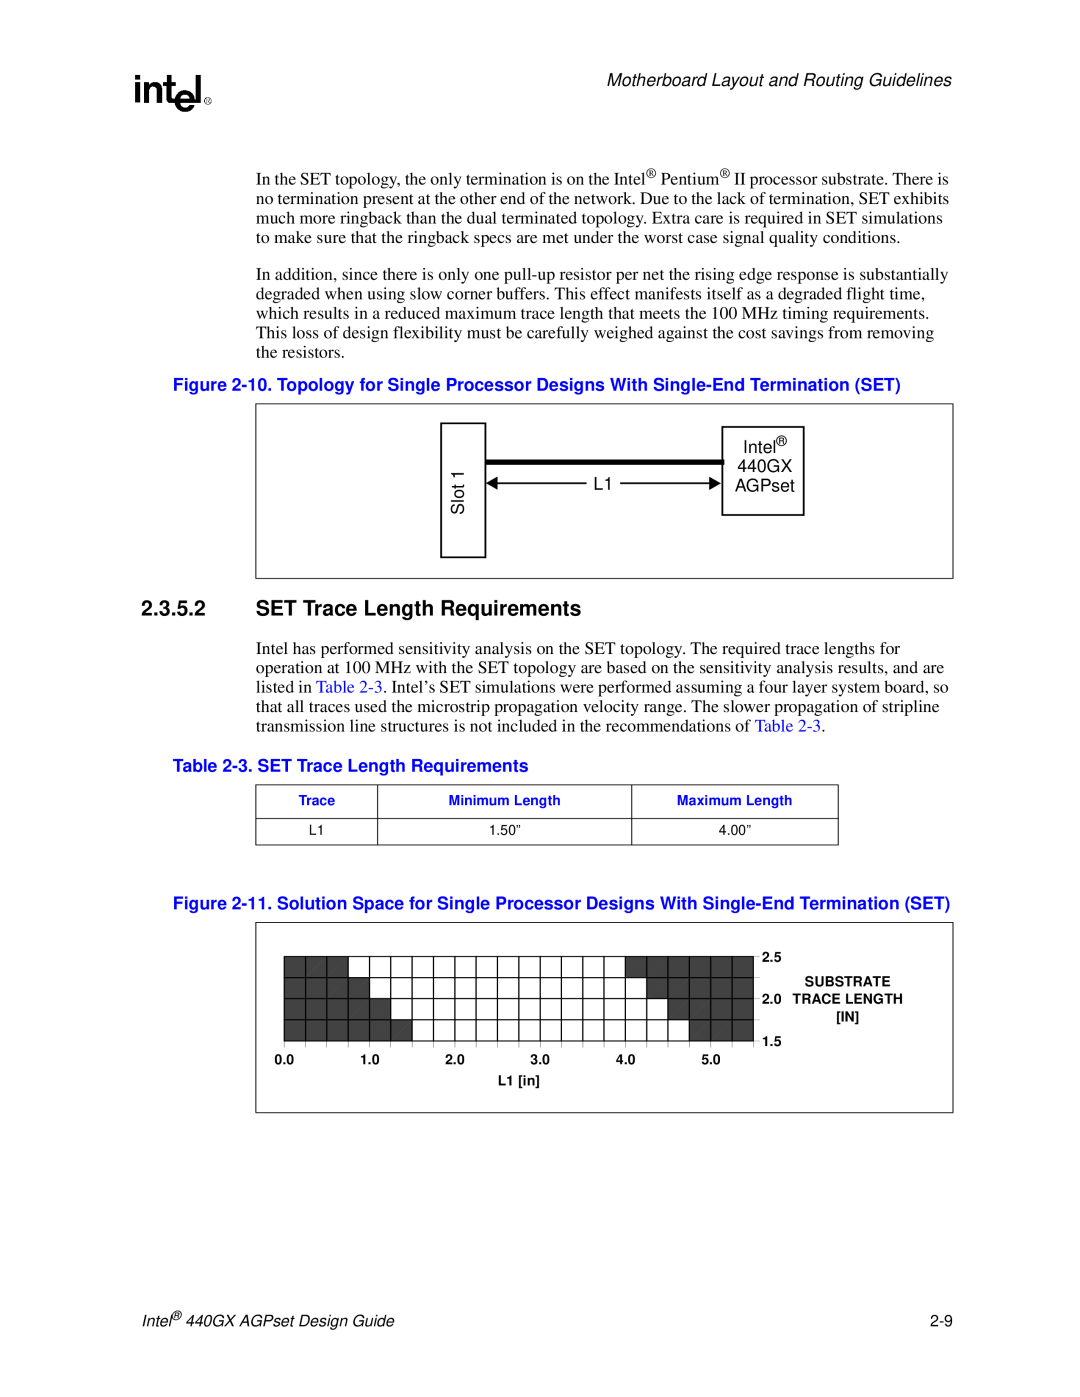 Intel 440GX manual 3. SET Trace Length Requirements, Motherboard Layout and Routing Guidelines 